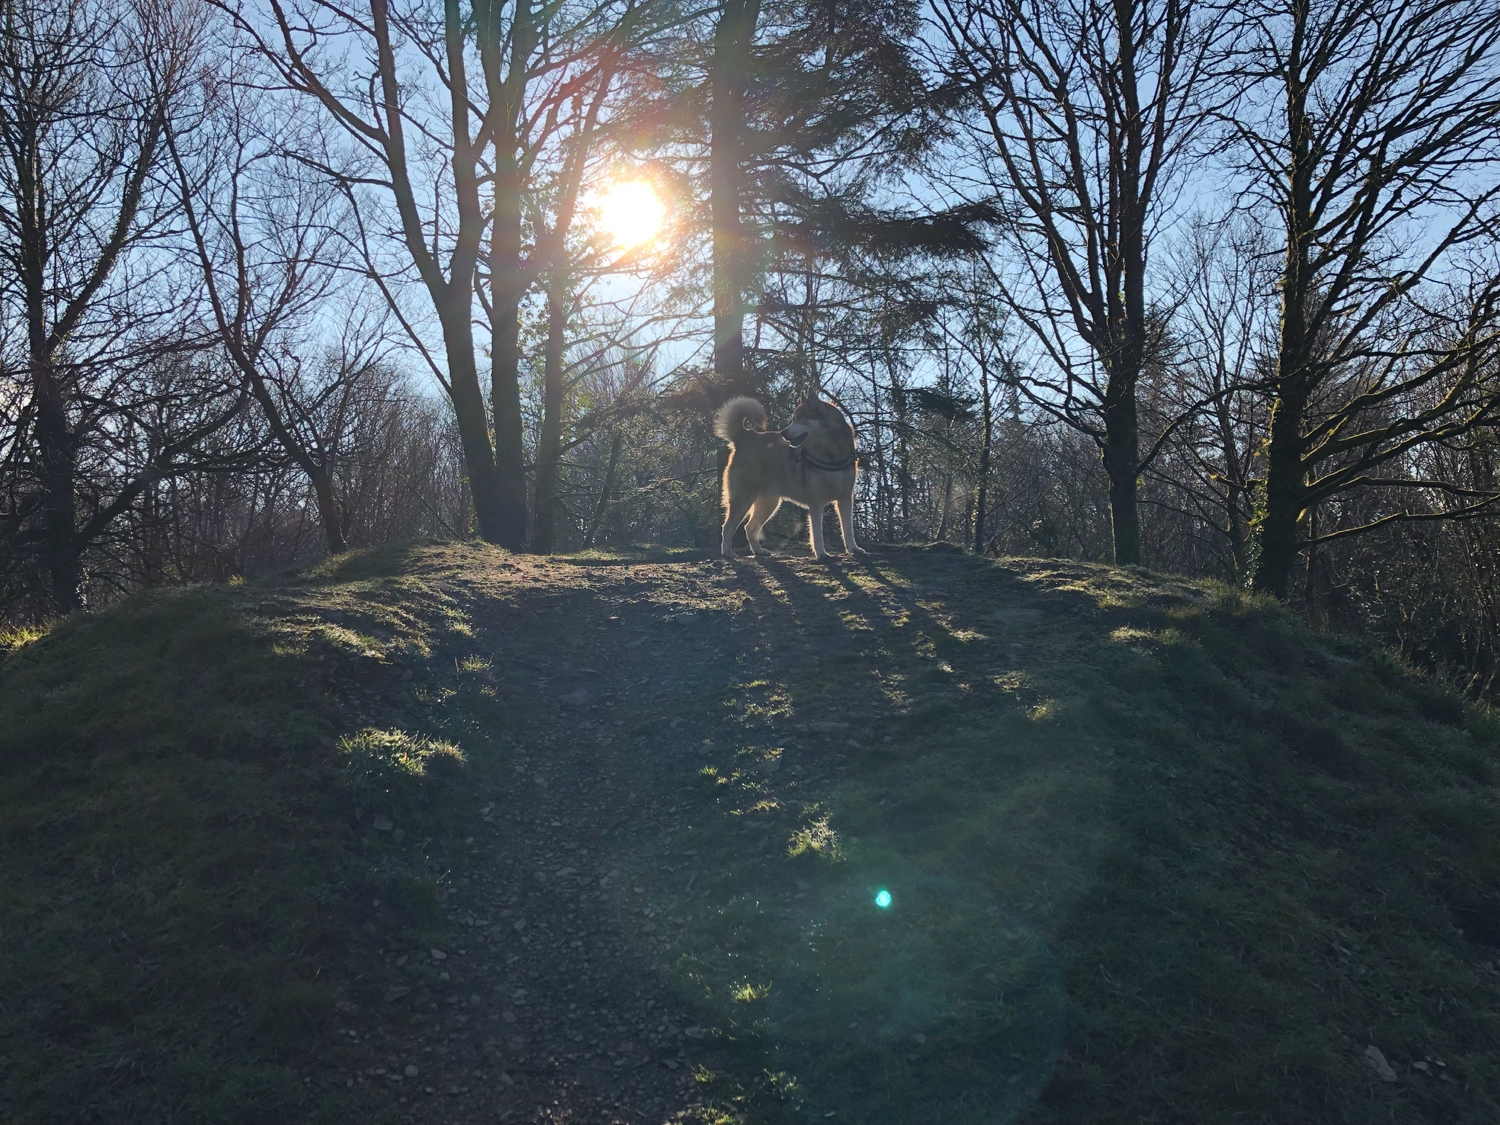 Osky on top of a mound in some sunny woods. He looks majestic.